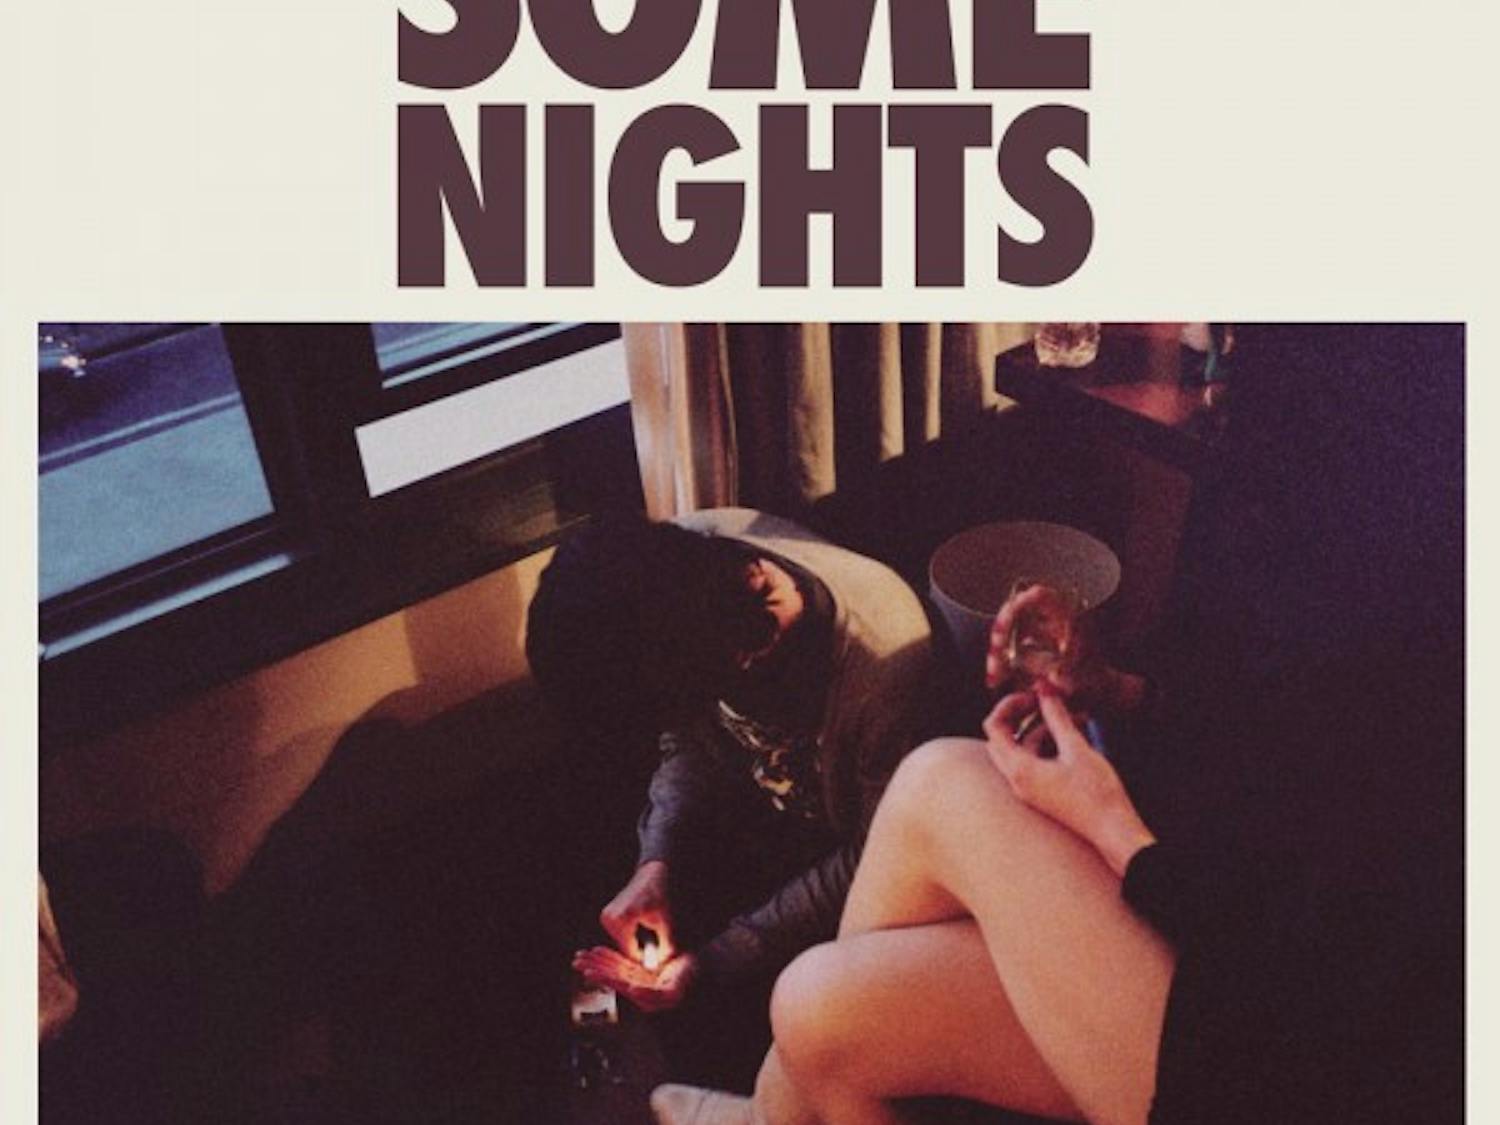 Fun.'s second album, "Some Nights," experiments with emotional new sounds and beats.